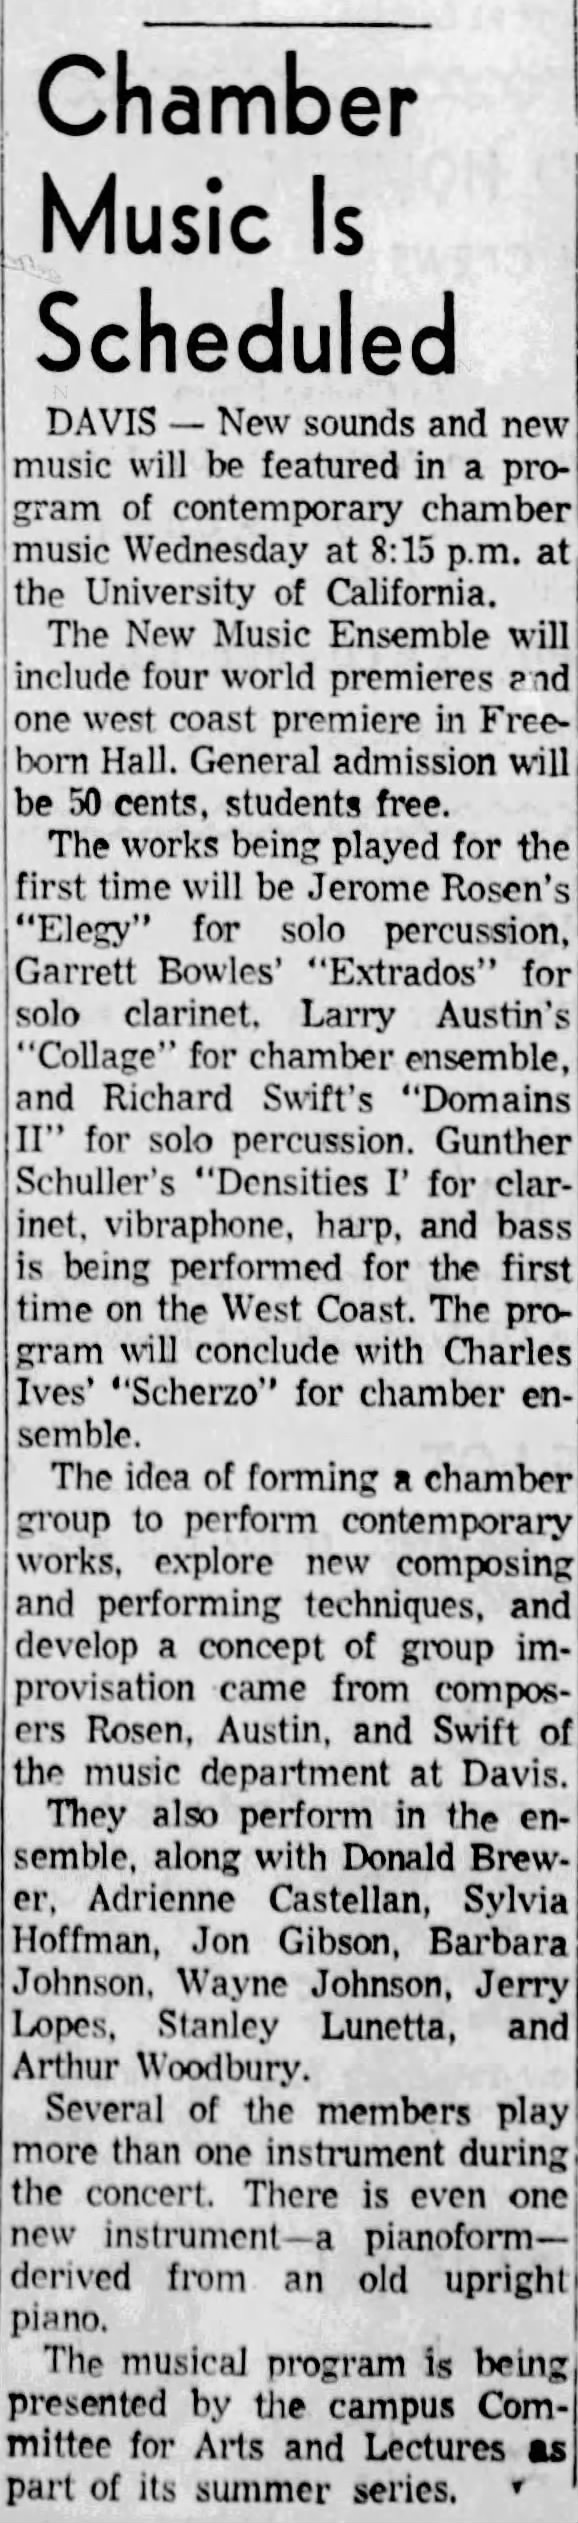 NME (7/31/63 concert)